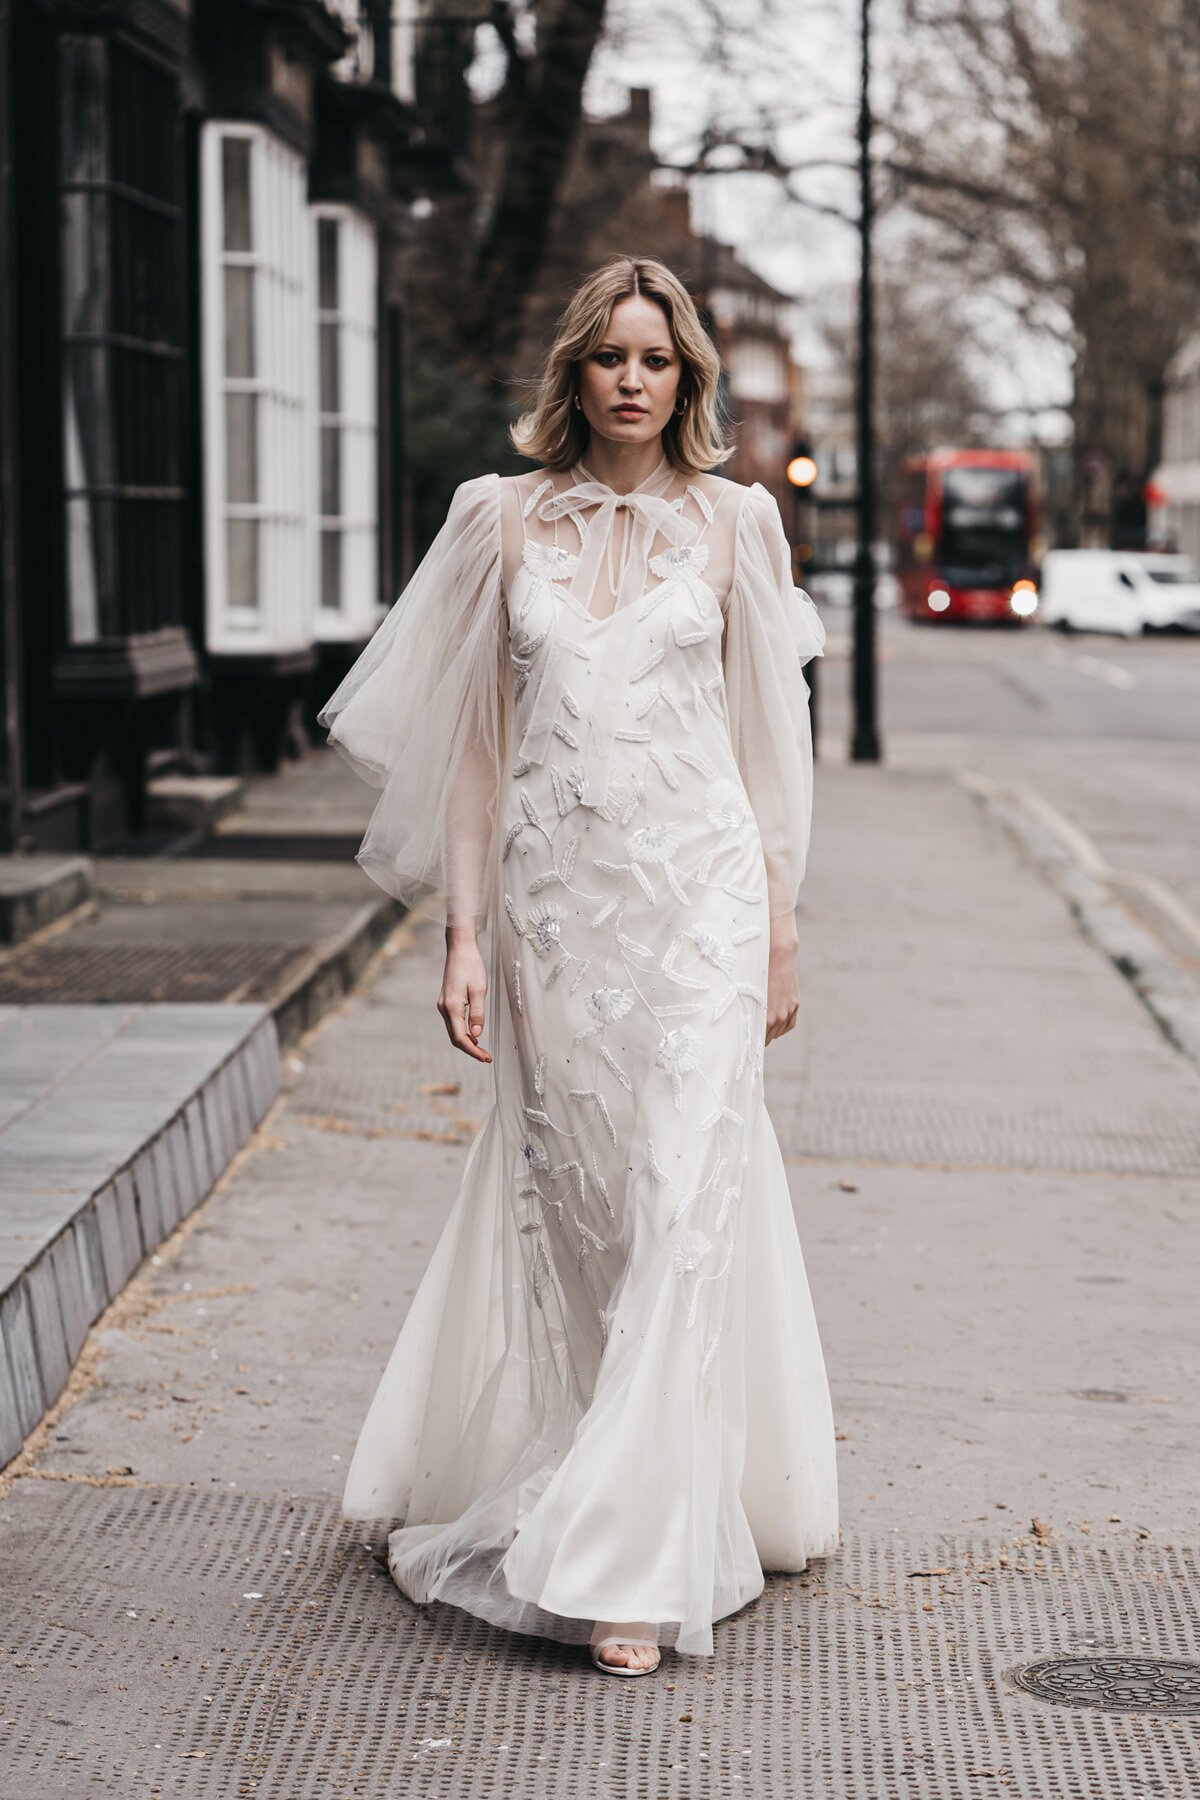 City wedding inspiration by Zach&amp;Grace featuring wedding dresses and separates by Halfpenny London